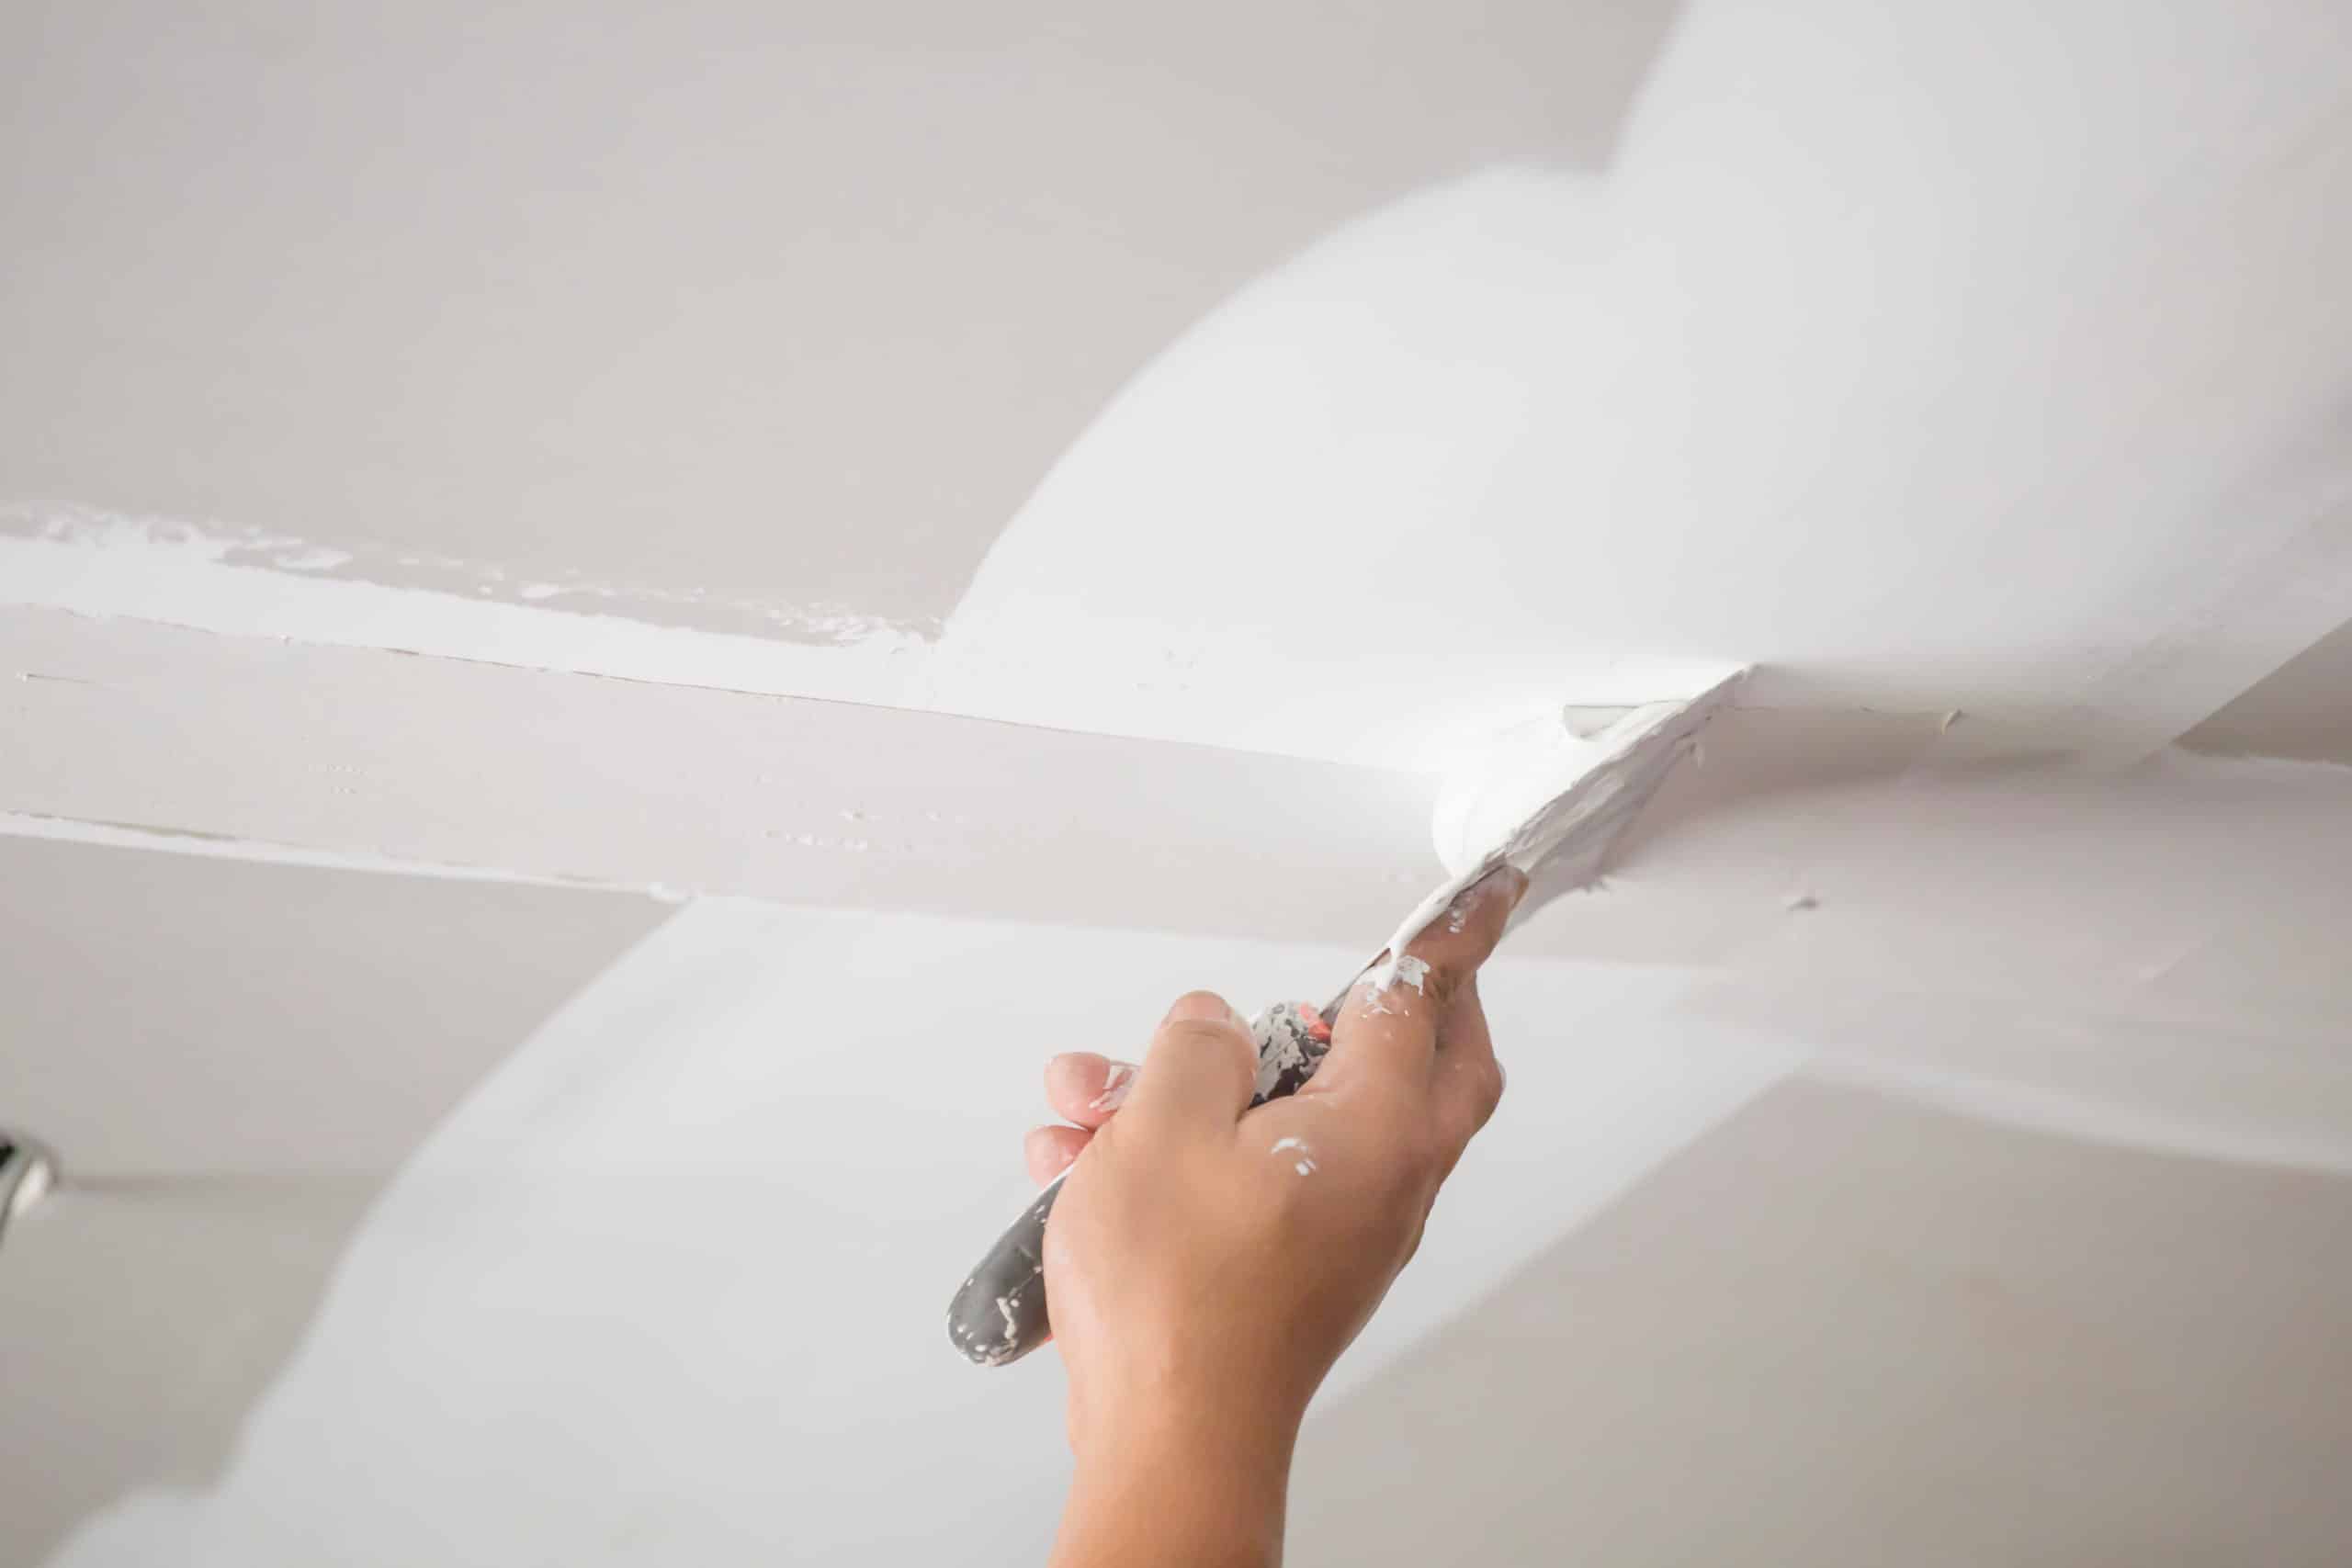 How To Start a Drywall Repair Business #2 - damianmartinez.com